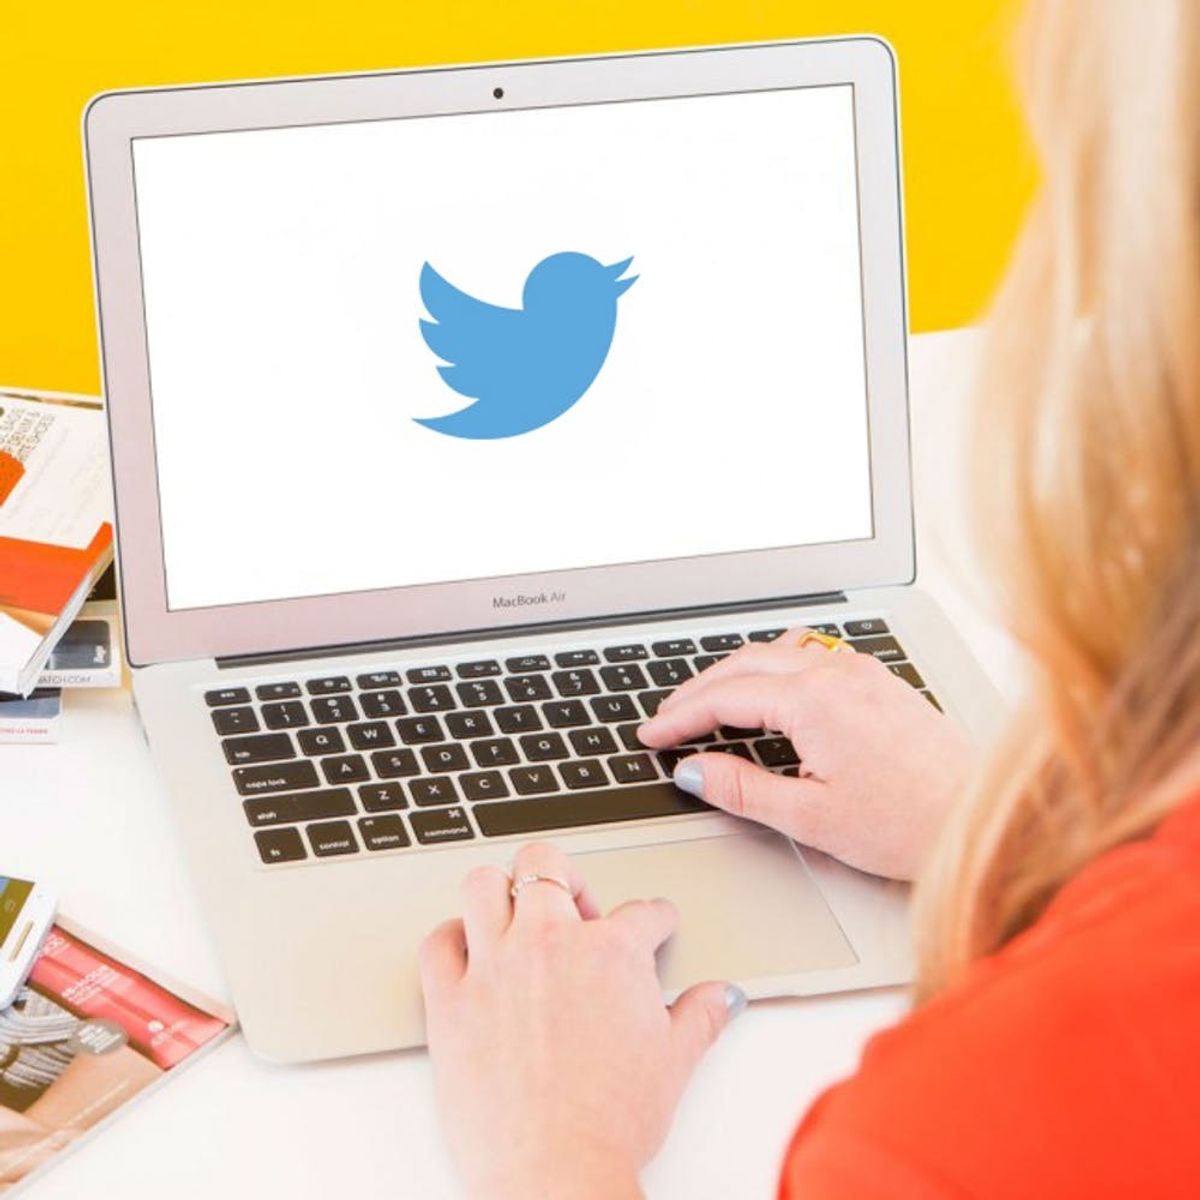 28 Twitter Keyboard Shortcuts to Blast Off Your Tweets